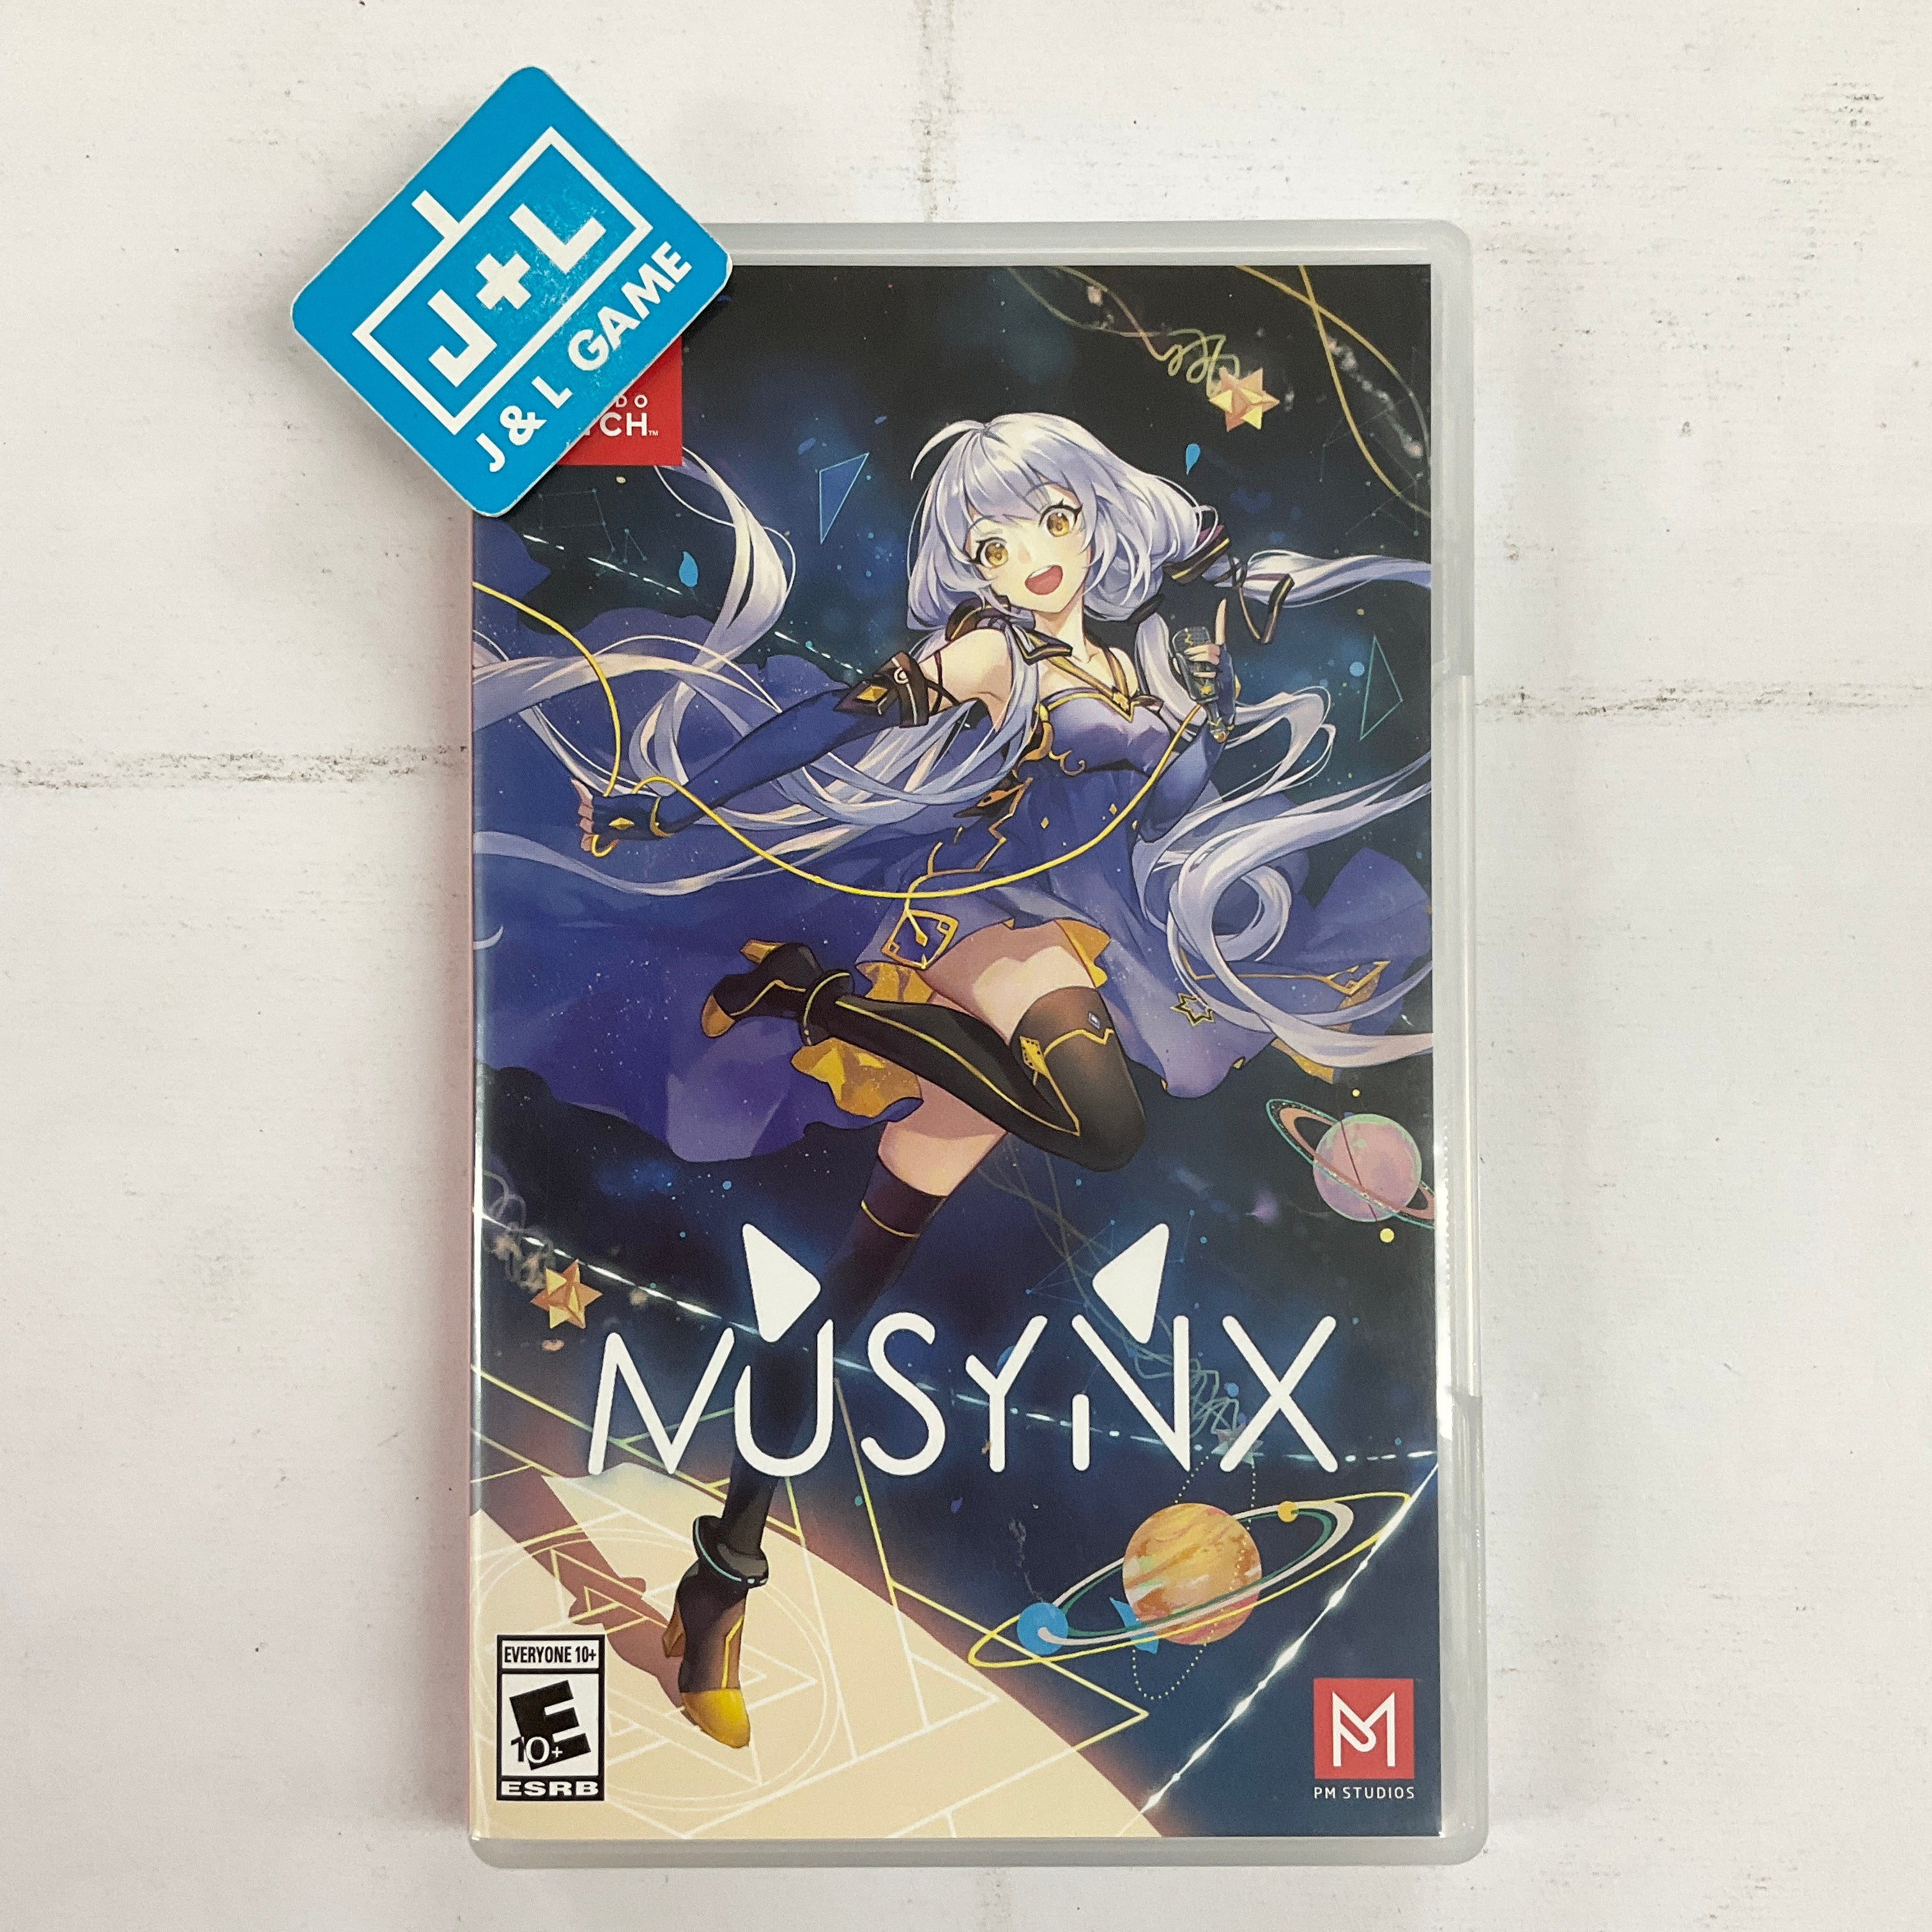 MUSYNX (Limited Cover) - (NSW) Nintendo Switch [Pre-Owned] Video Games PM Studios   